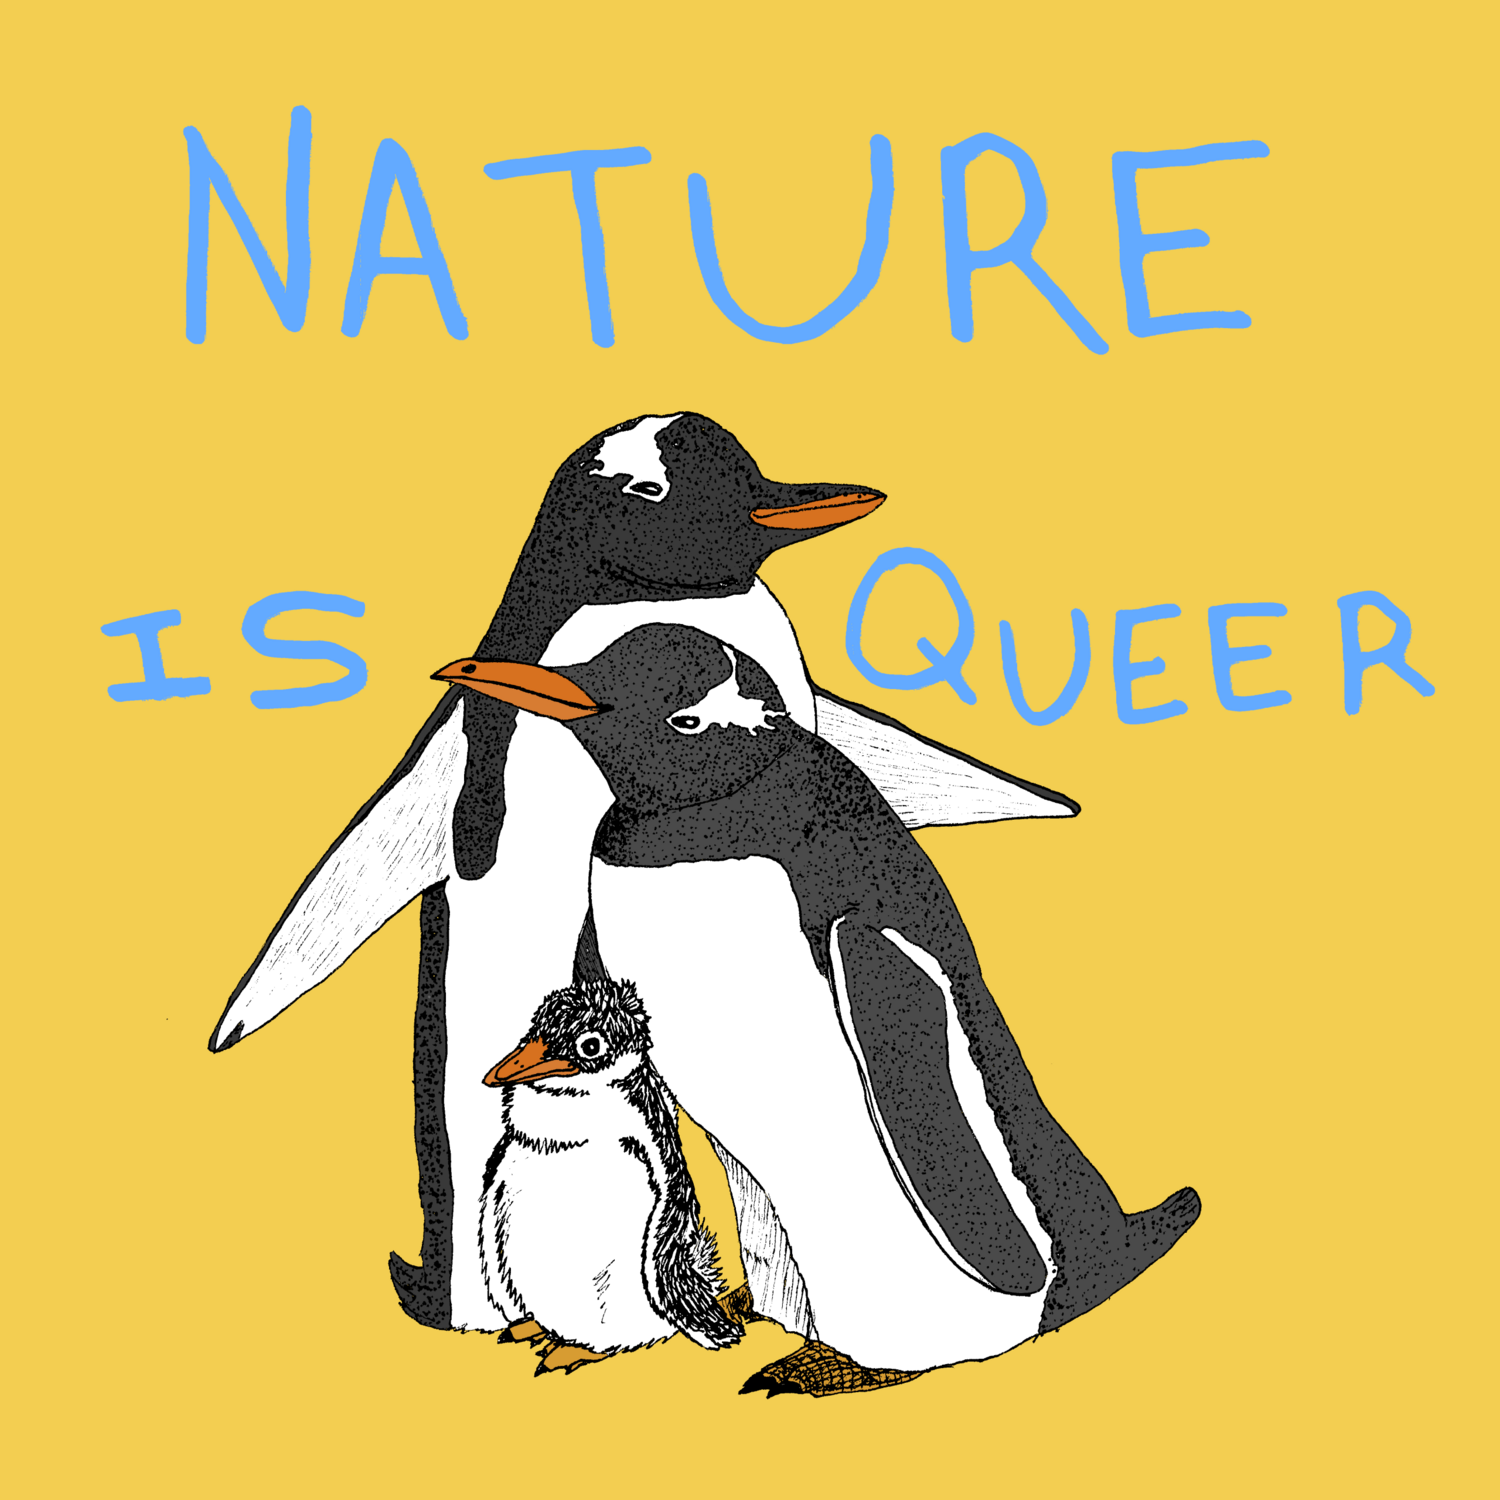 Penguins are Queer - Print by Sarah Maloney